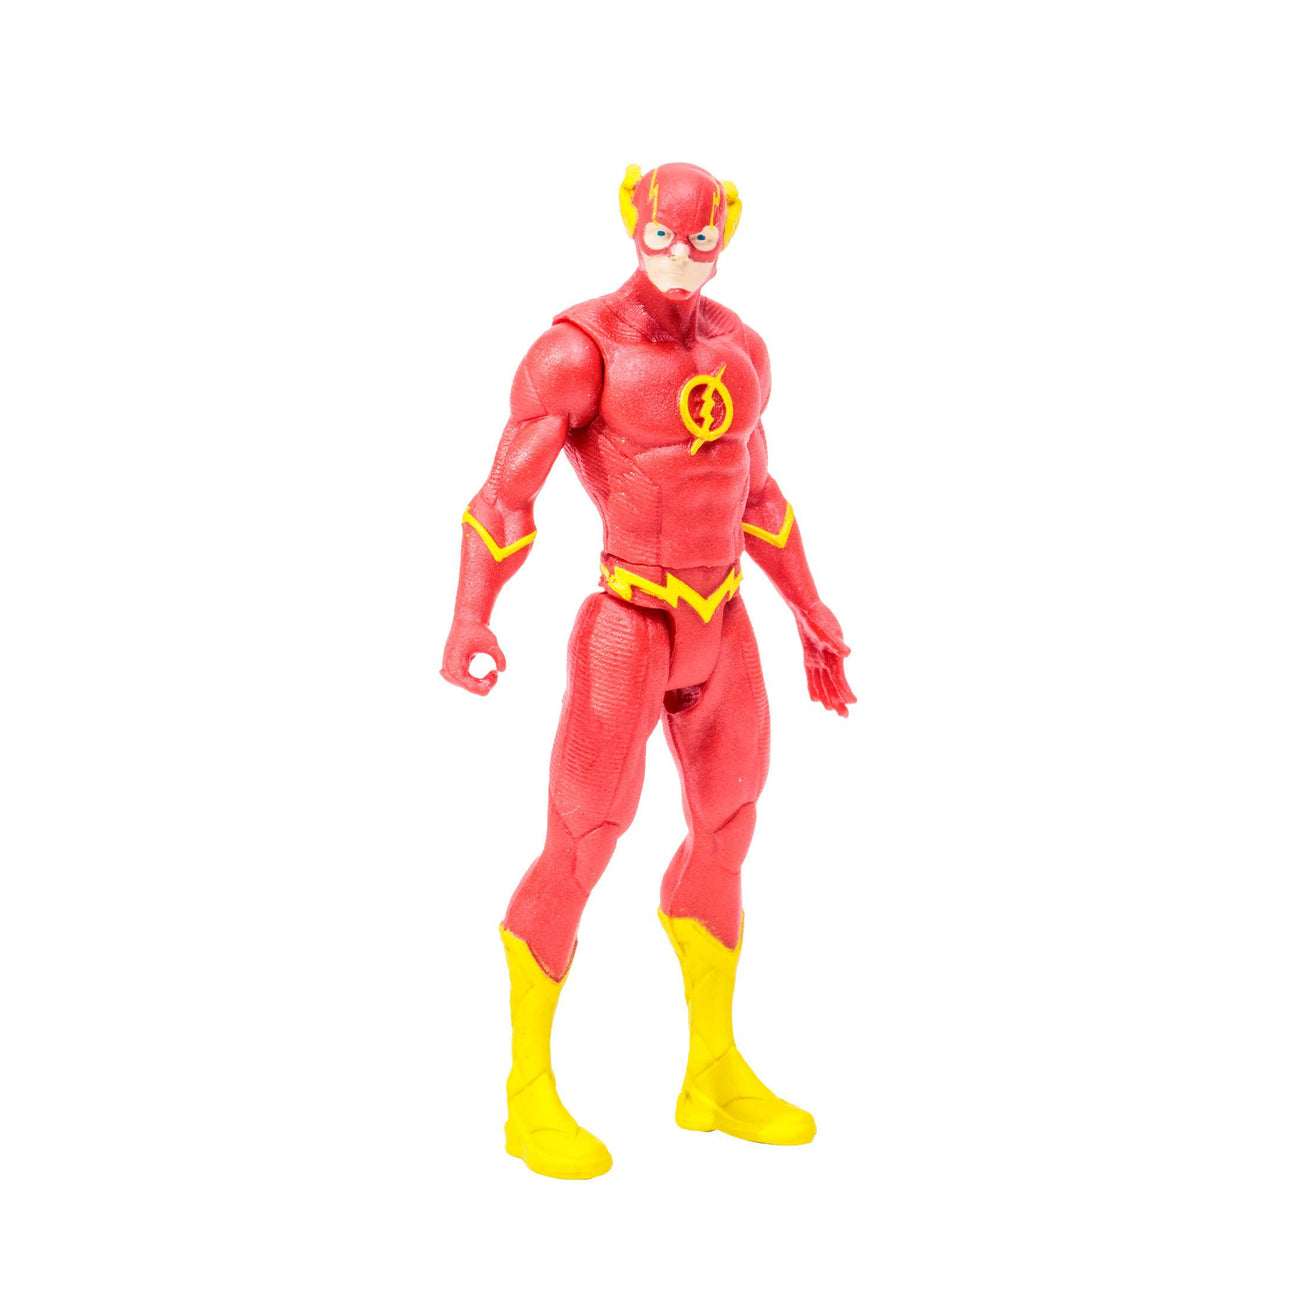 DC Page Punchers: The Flash (Flashpoint) - Actionfigur & Comic-Actionfiguren-McFarlane Toys-Mighty Underground